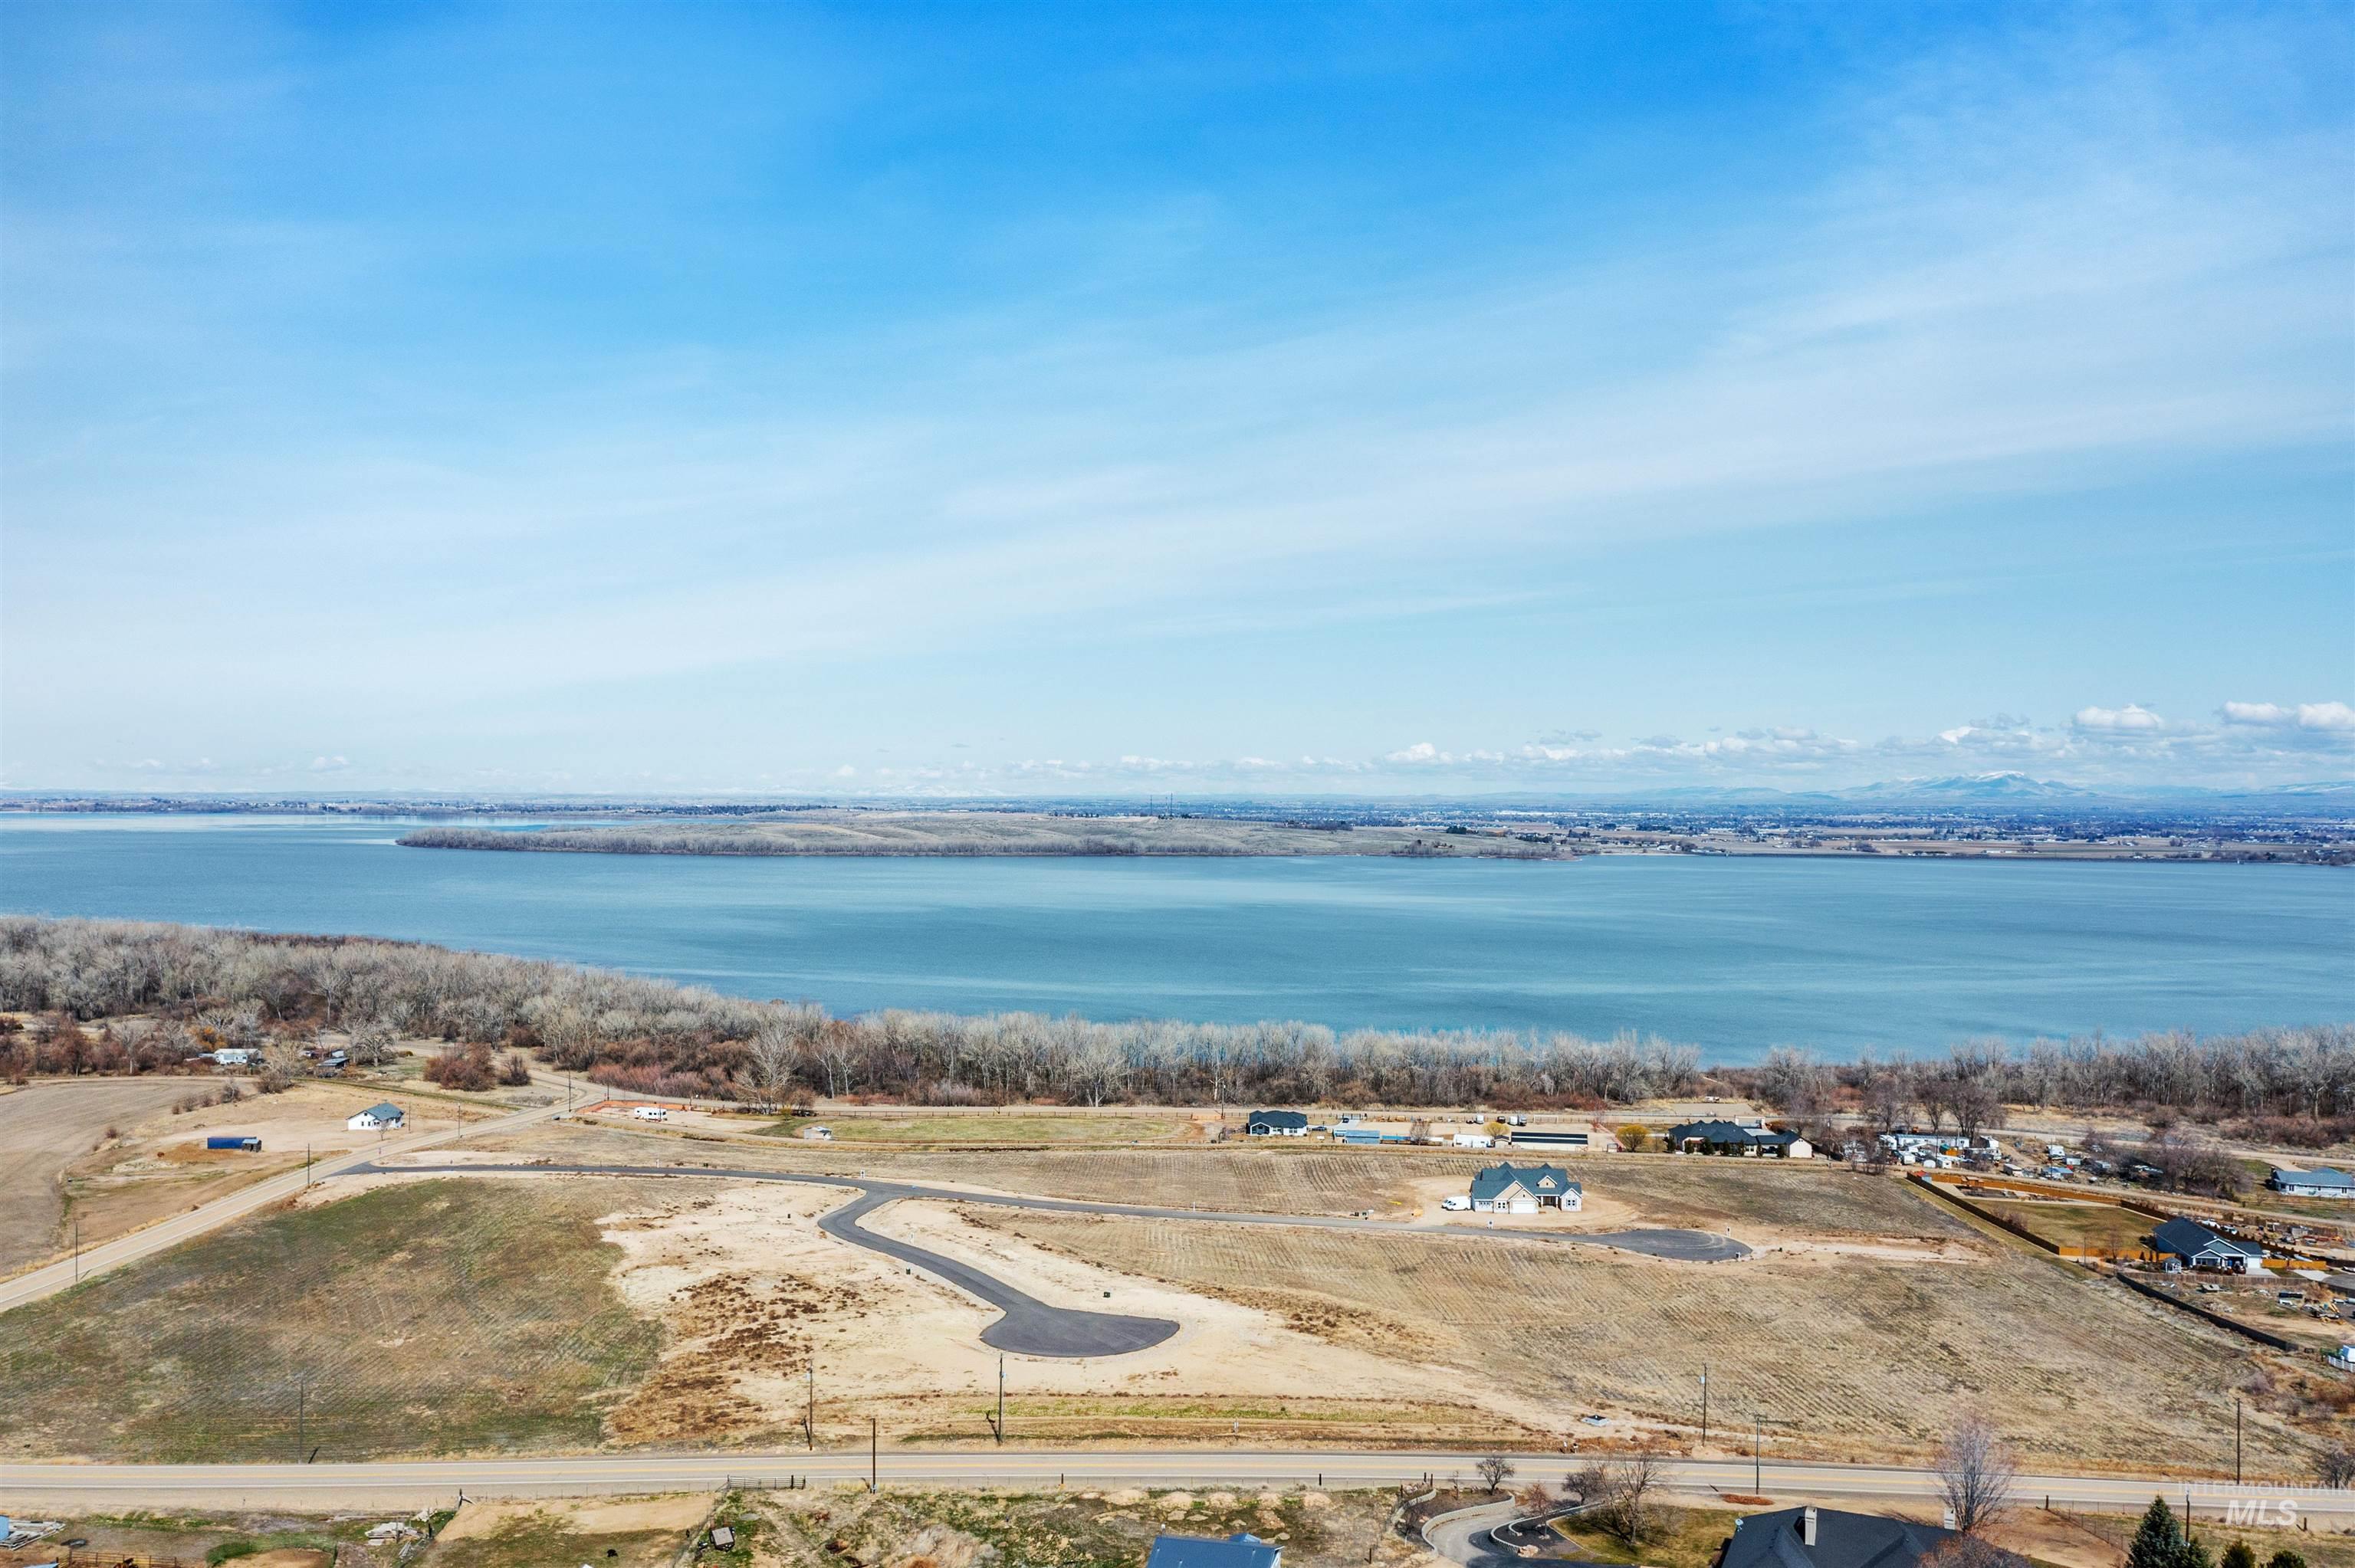 13970 Waterfront Ln., Nampa, Idaho, 83686, United States, 3 Bedrooms Bedrooms, ,3 BathroomsBathrooms,Residential,For Sale,13970 Waterfront Ln.,1492406